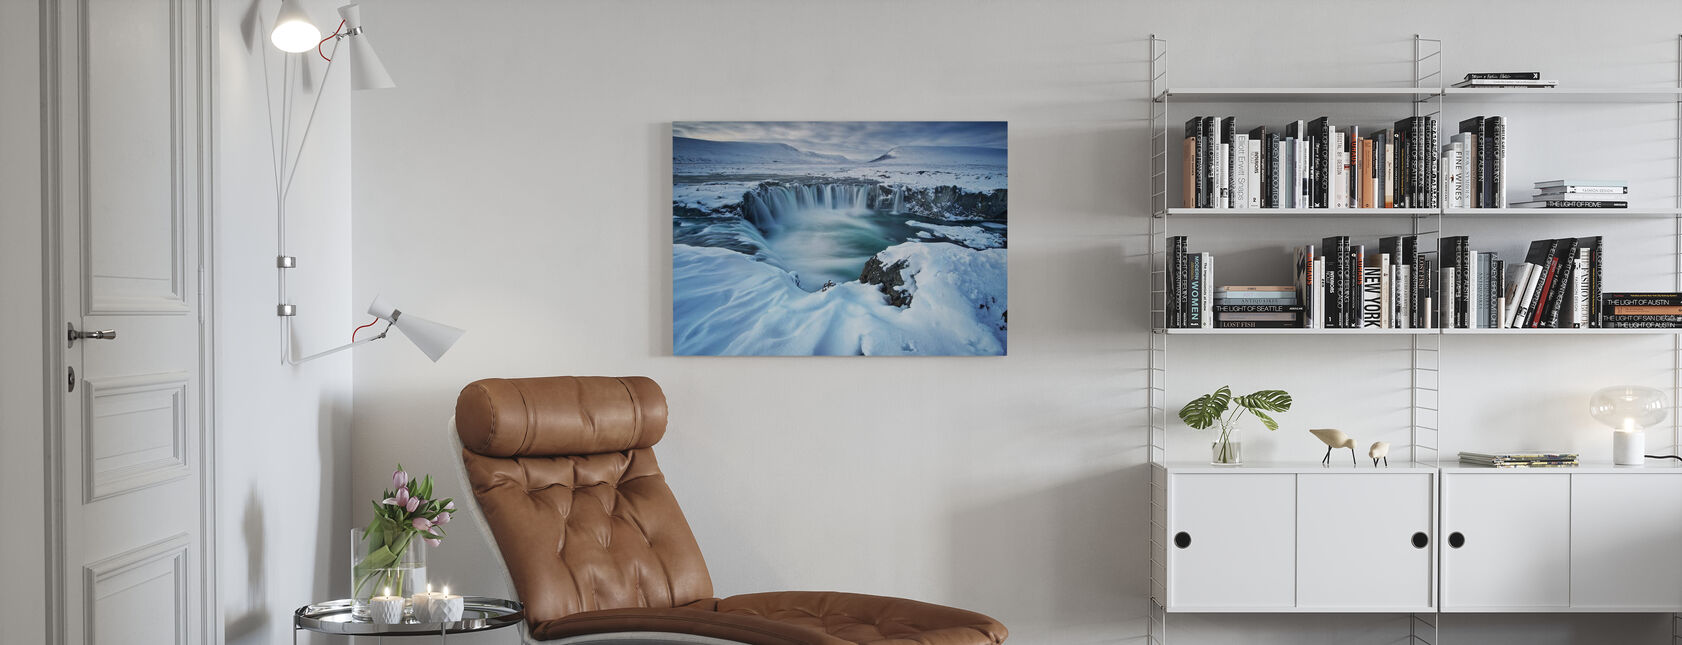 Waterfall of the Gods - Canvas print - Living Room